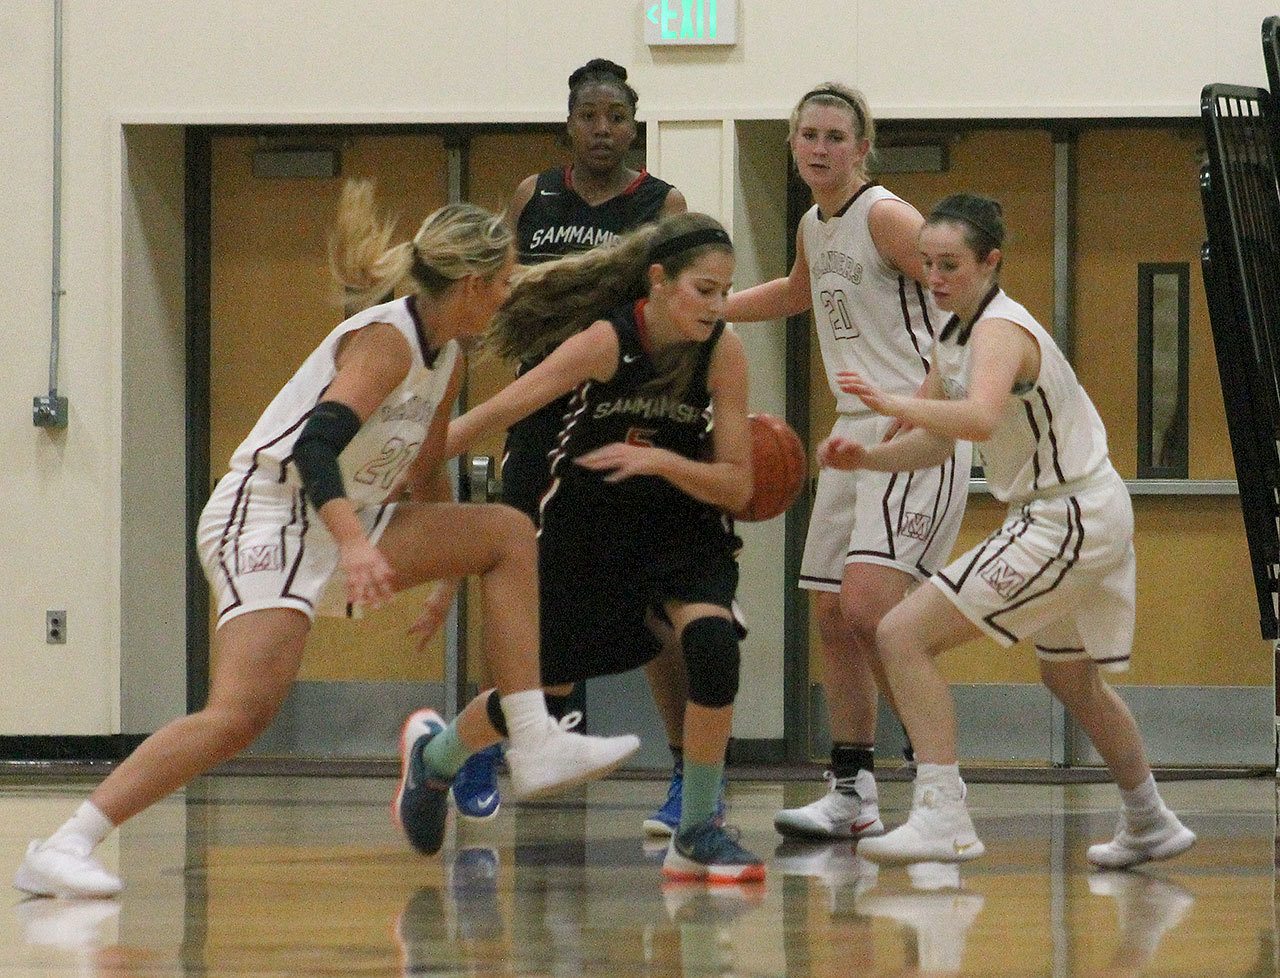 Mercer Island’s Macy Mounger, far left, and Claire Mansfield, far right, swarm Sammamish guard Katelyn Nagel during the Islanders’ home opener against the Totems Friday at Mercer Island High School. Mercer Island beat Sammamish 69-33. Joe Livarchik/staff photo.